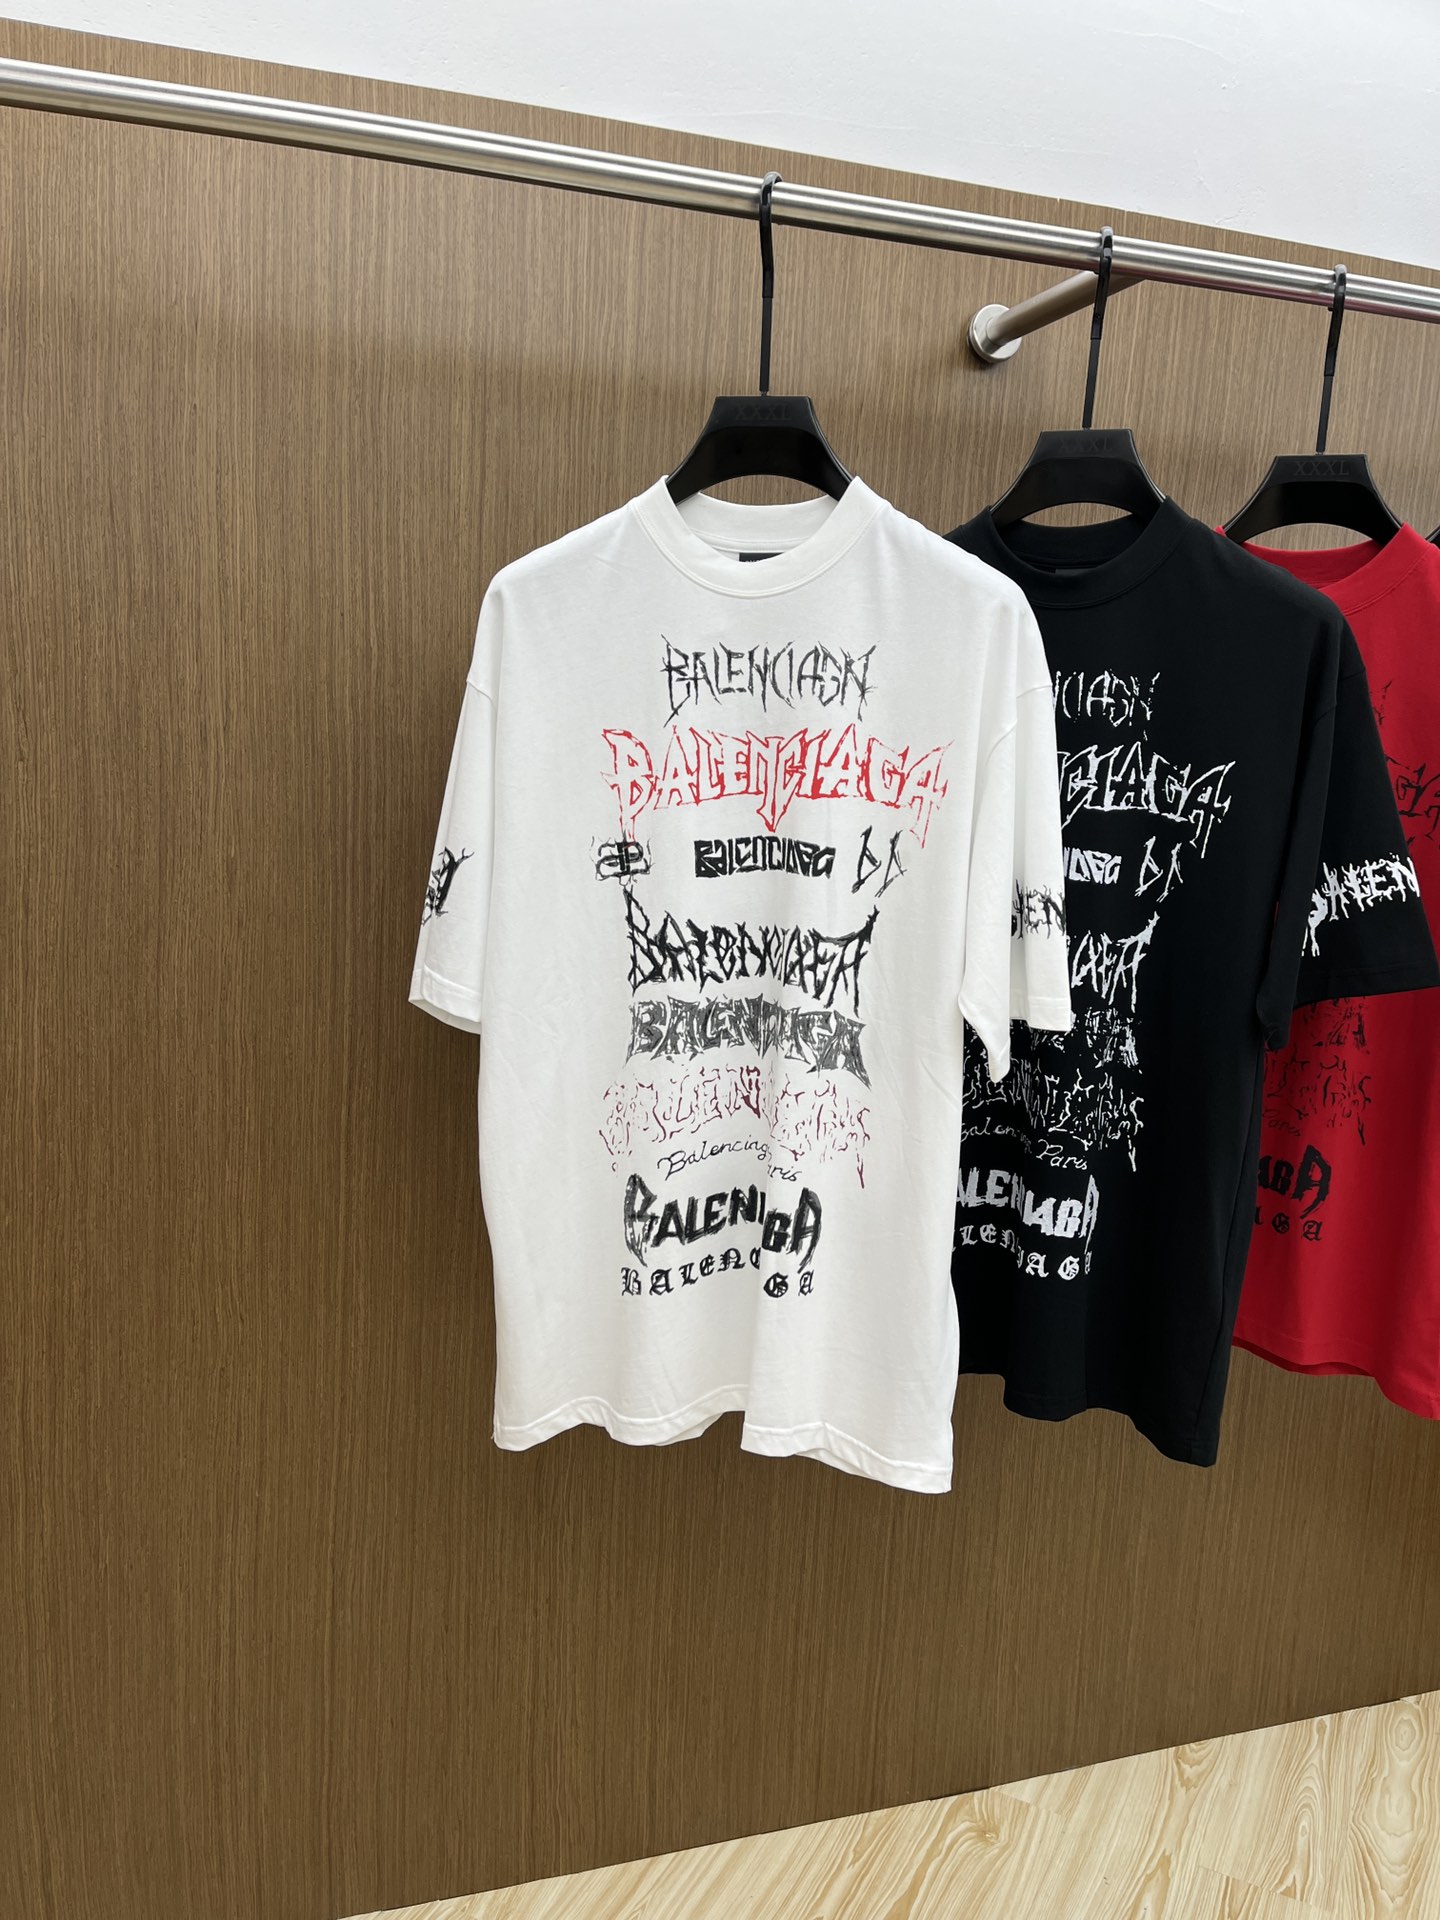 What’s the best to buy replica
 Balenciaga Clothing T-Shirt Black Pink Red White Printing Unisex Cotton Knitting Spring/Summer Collection Short Sleeve